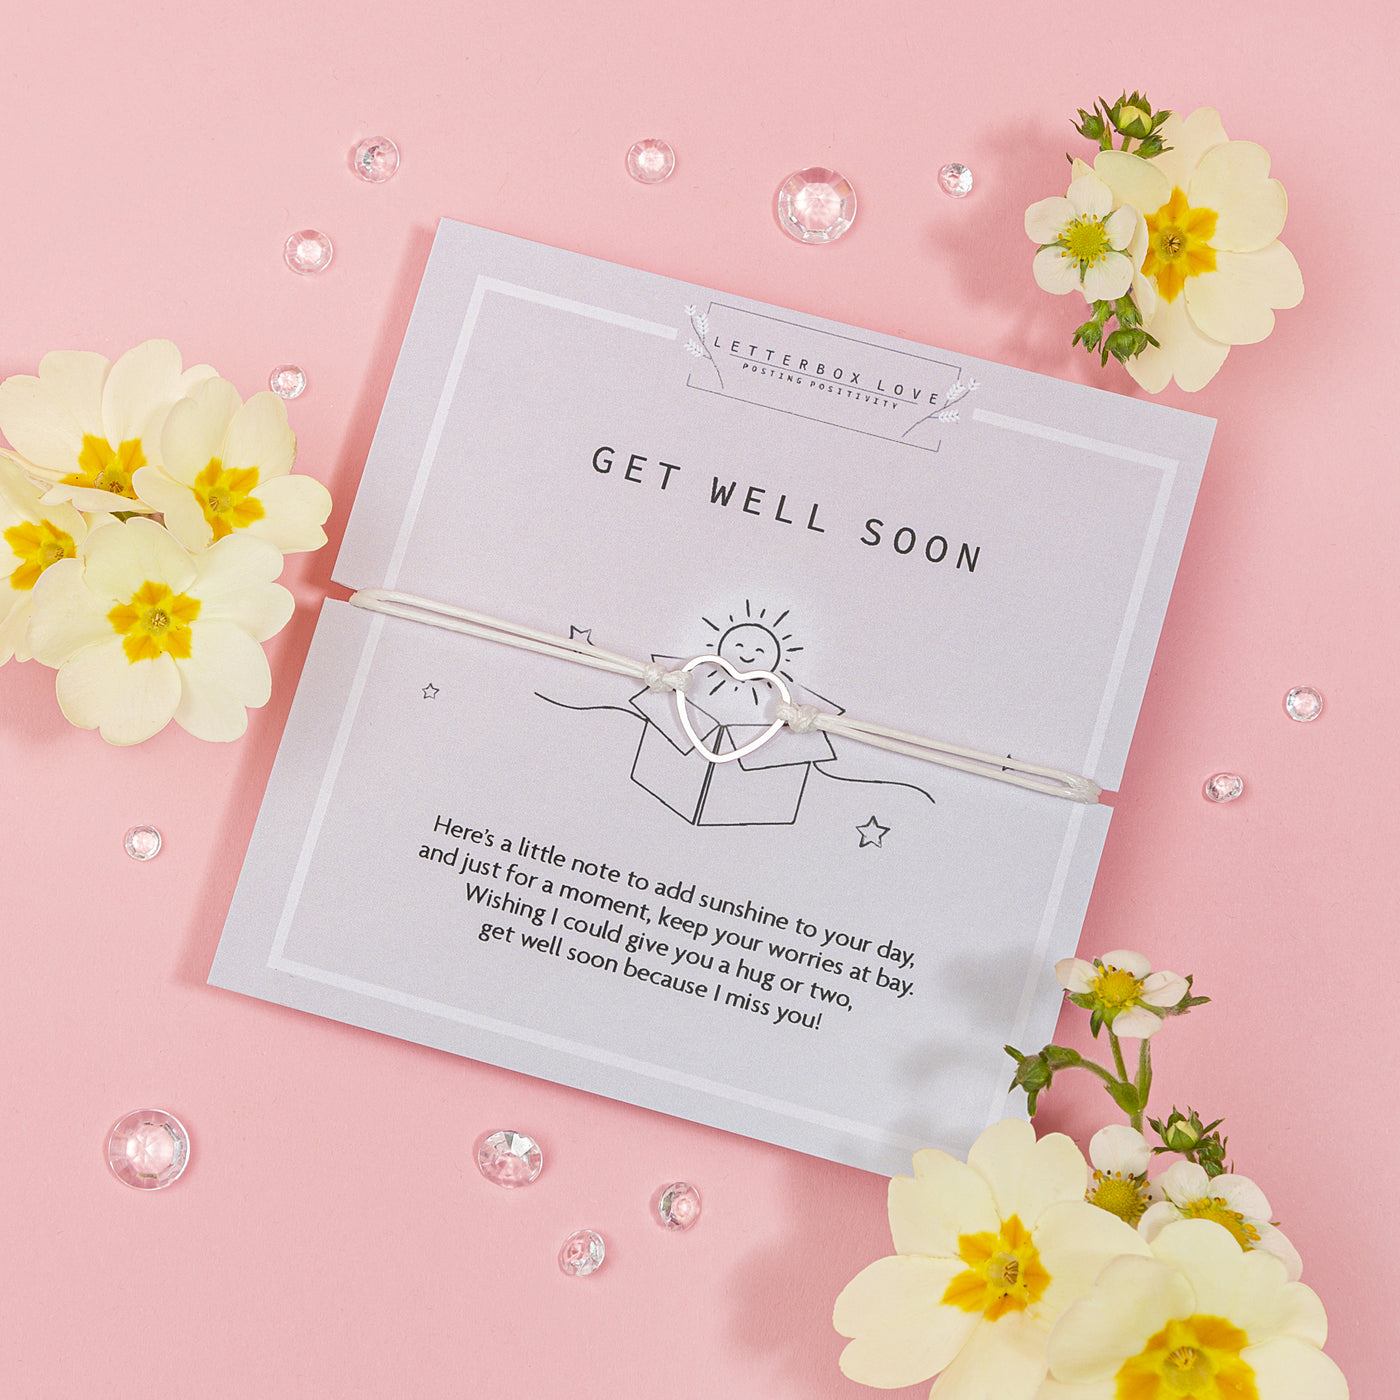 Charming 'Get Well Soon' card on a soft pink background, tied with a delicate white ribbon. The card features a cheerful sun illustration and a comforting message. Beside the card are vibrant yellow flowers with white petals and scattered clear gemstones, evoking a sense of warmth and well-wishes.